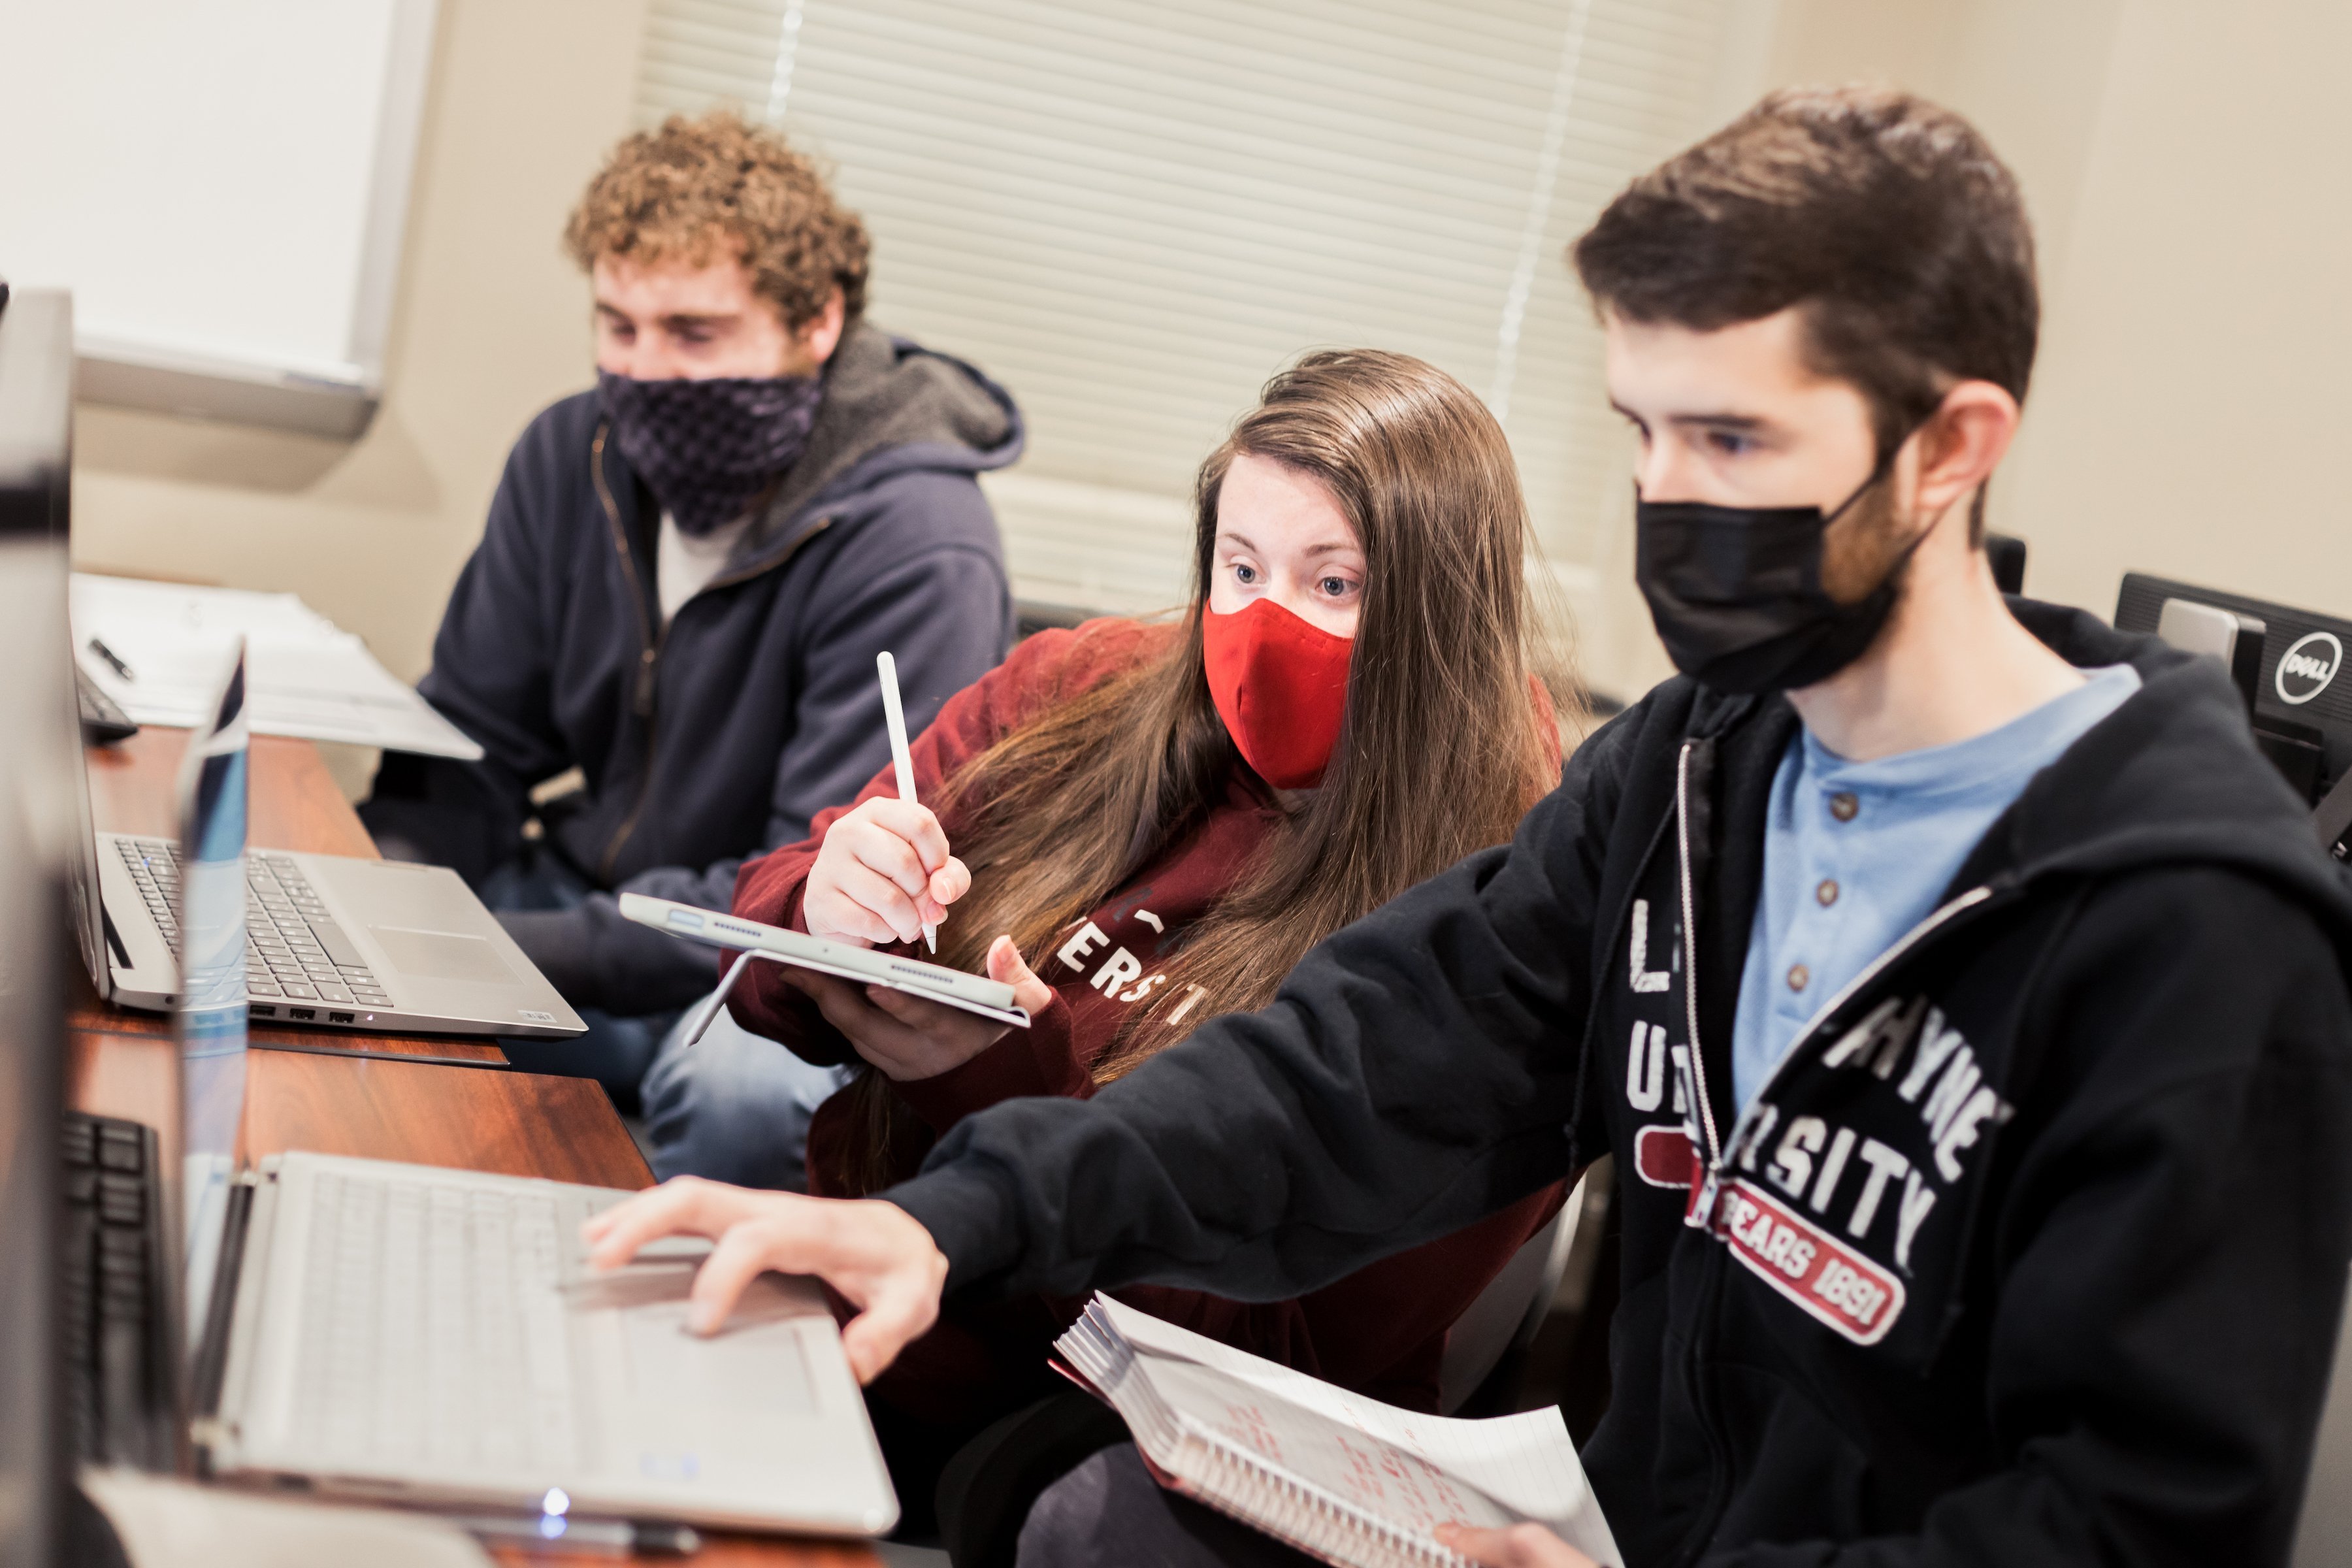 Three masked students sit in a classroom taking notes and working on computers